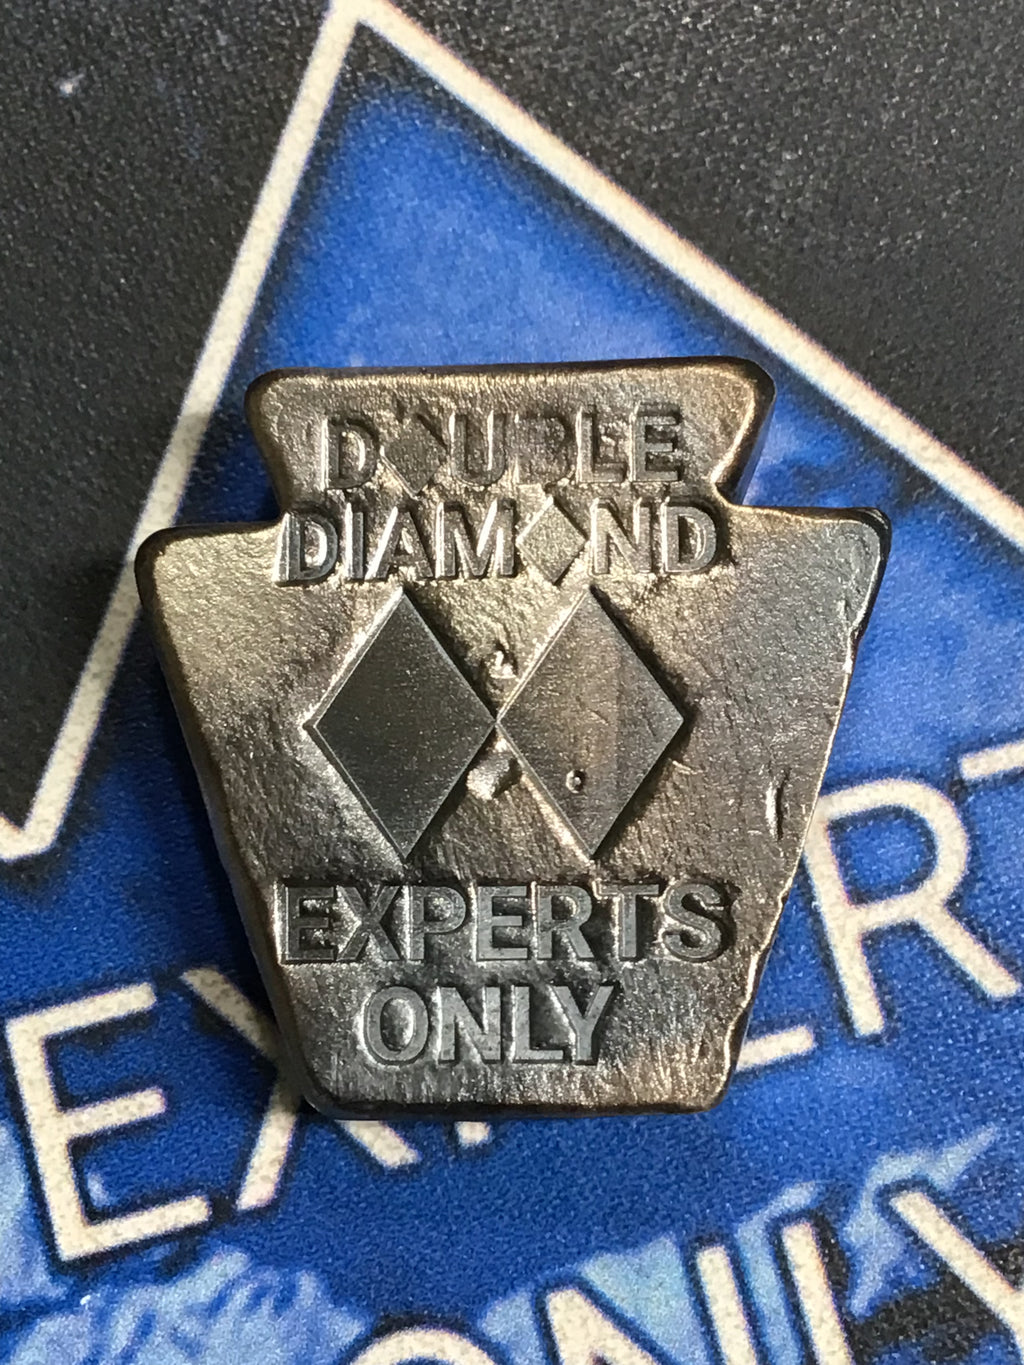 Diamond and .999 Fine Silver – Paint On Screen